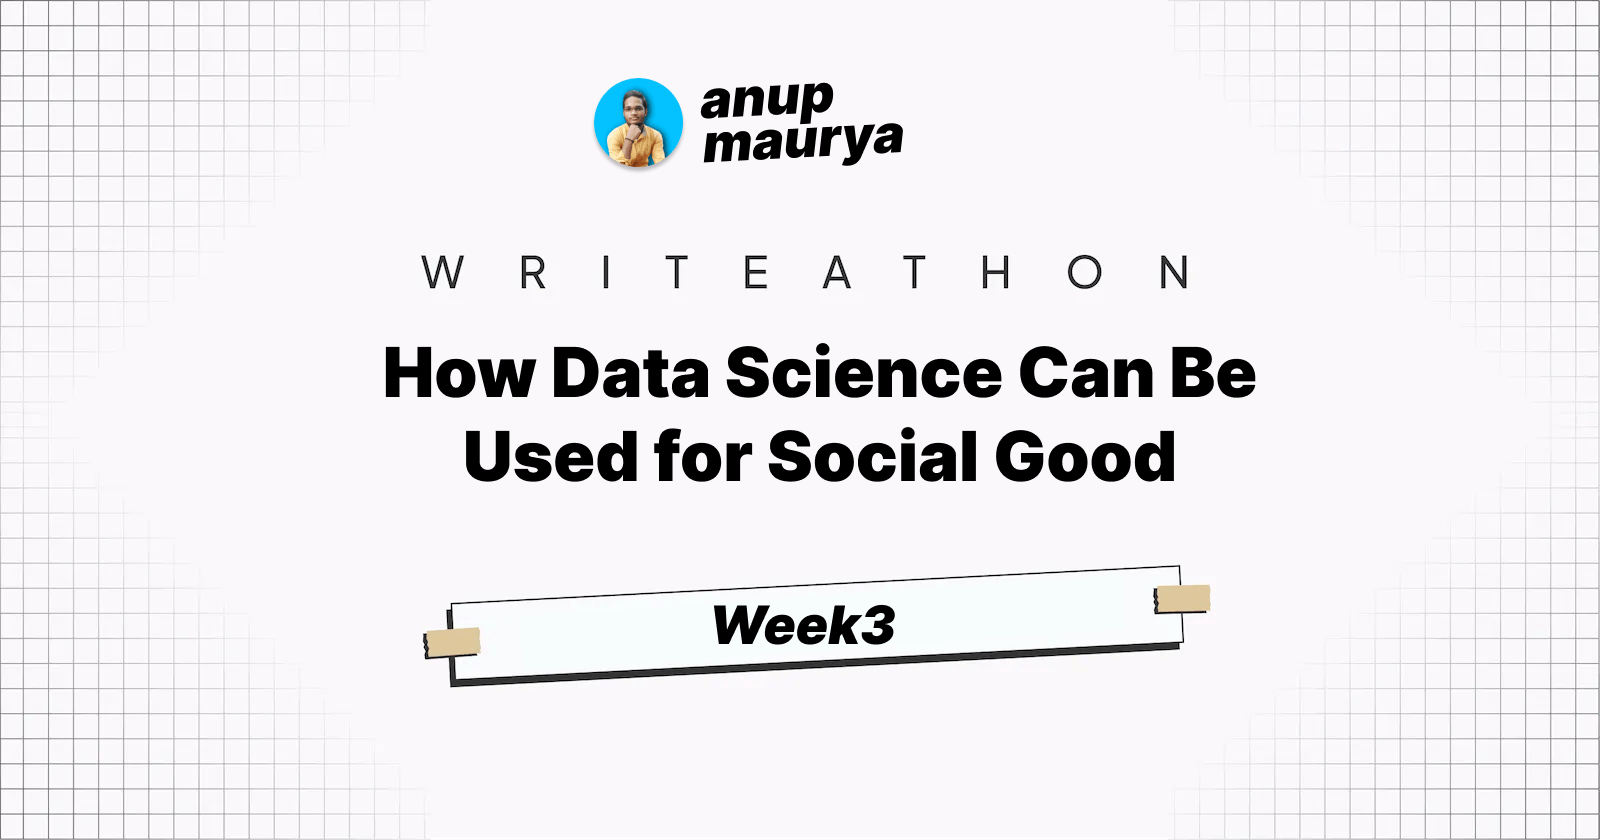 How Data Science Can Be Used for Social Good